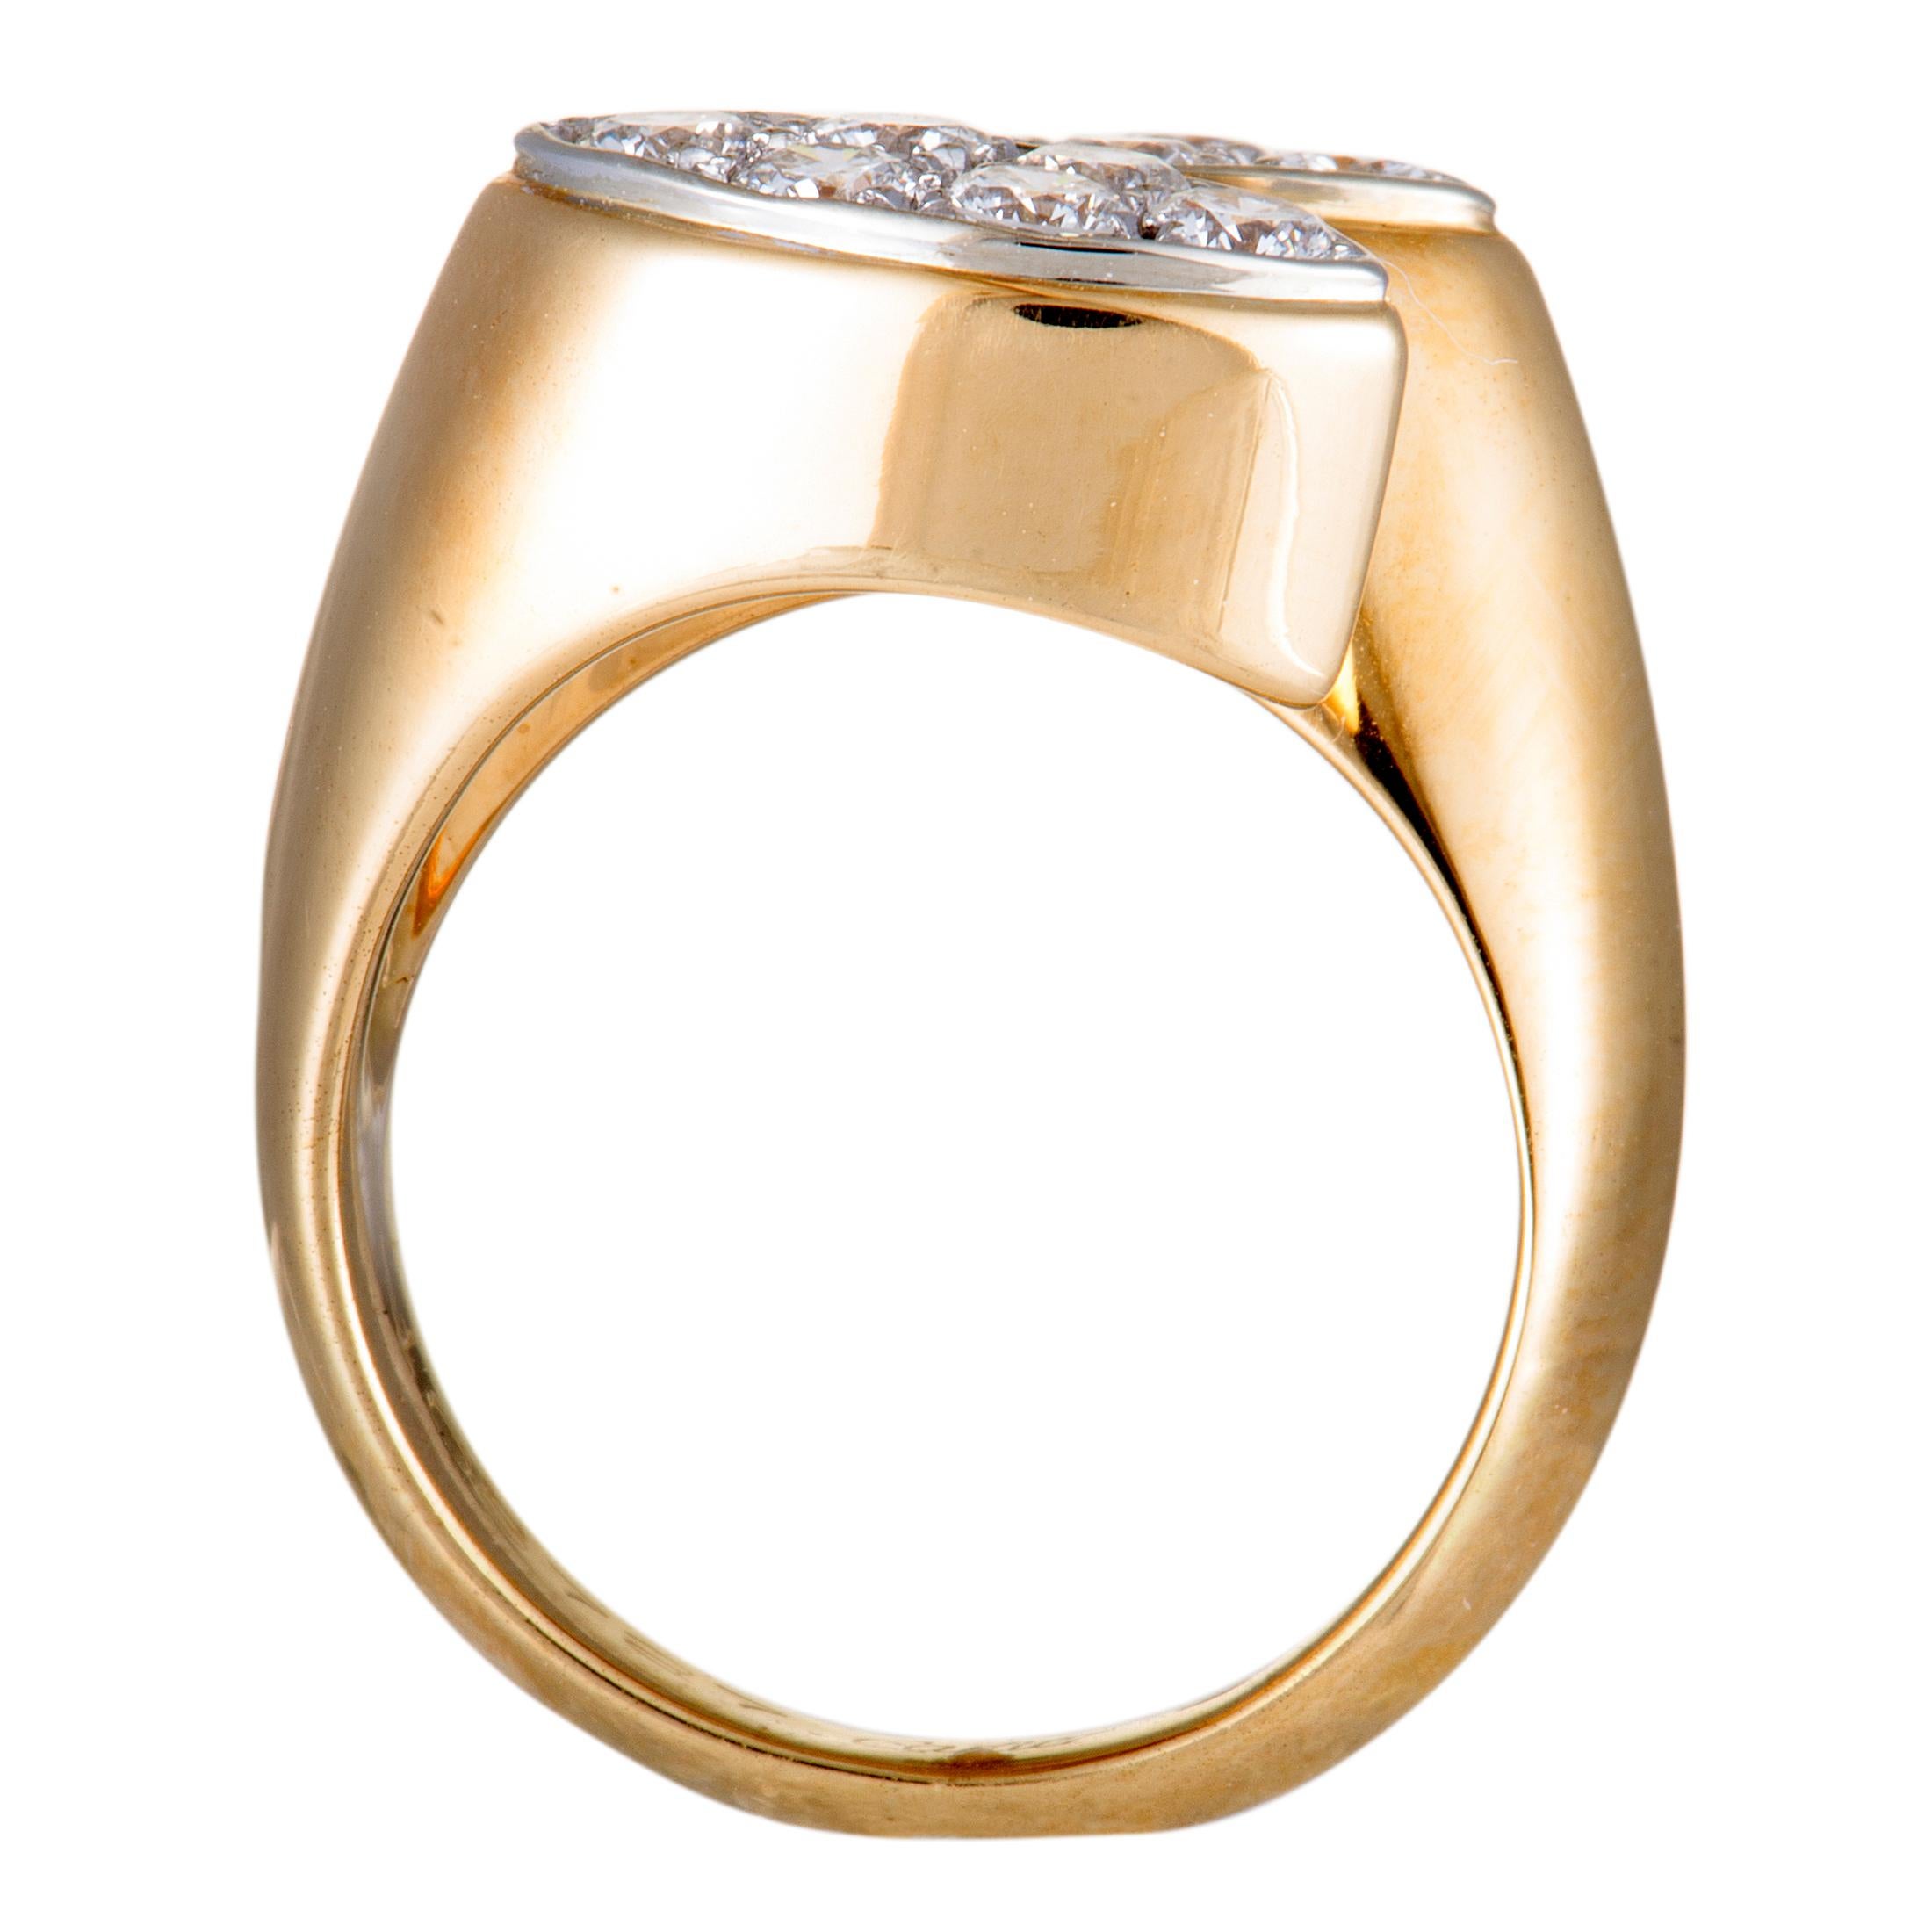 If you wish to accentuate your look with a jewelry piece that exudes refinement and luxury then this stunning vintage ring from Cartier is an excellent choice. The ring is beautifully made of 18K yellow and 18K white gold and it is expertly set with